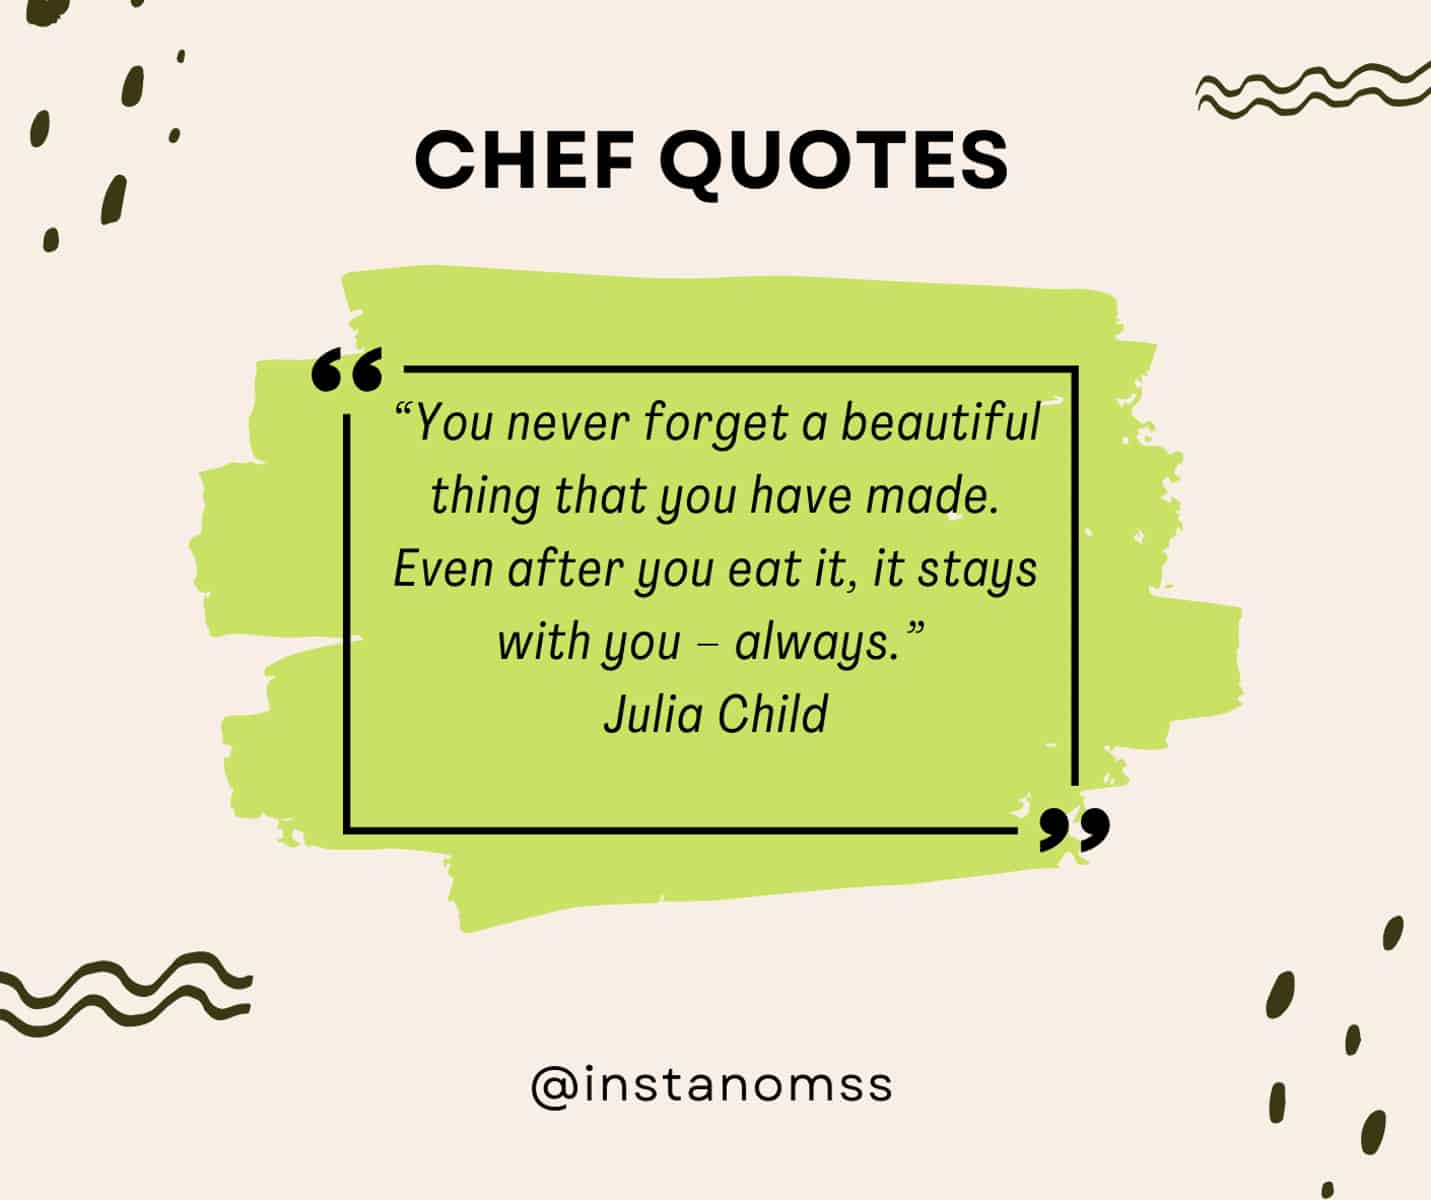 “You never forget a beautiful thing that you have made. Even after you eat it, it stays with you – always.” Julia Child